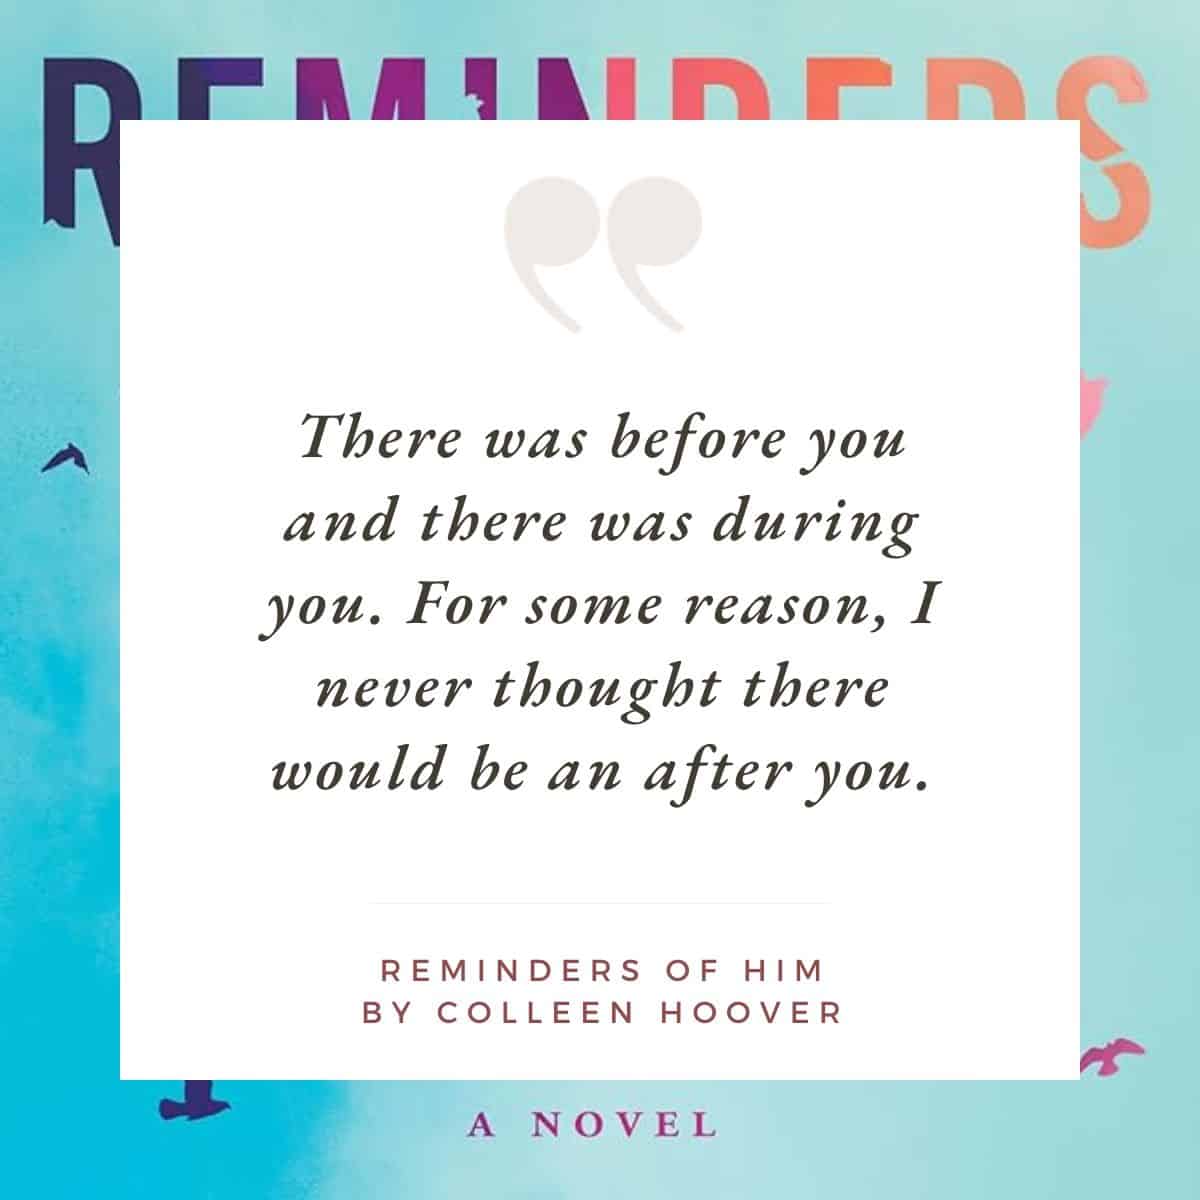 "There was before you and there was during you. For some reason, I never thought there would be an after you." Reminders of Him by Colleen Hoover.